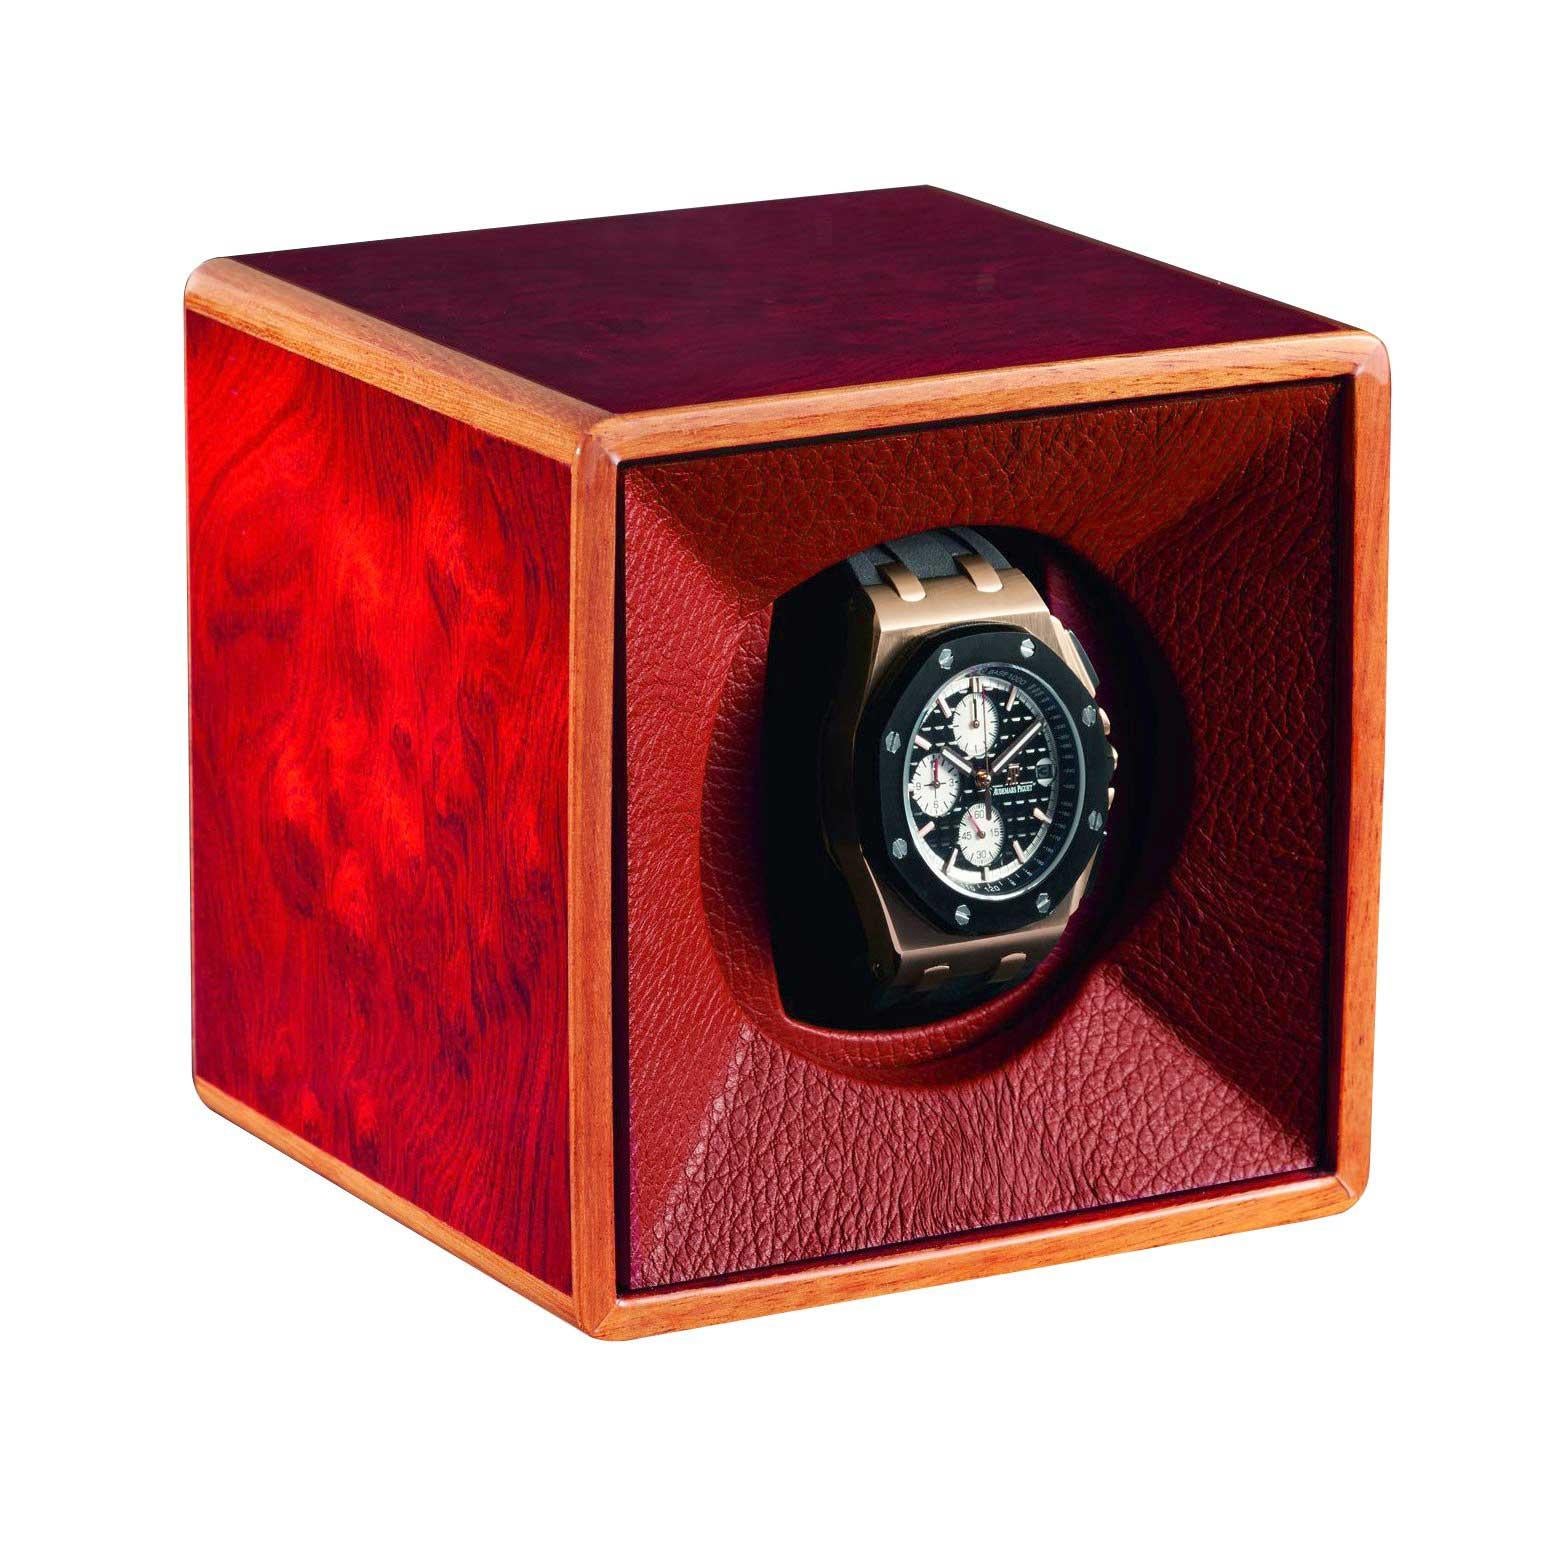 Tempo Unico Rosso Red Watch Winder Lined in Leather by Agresti For Sale